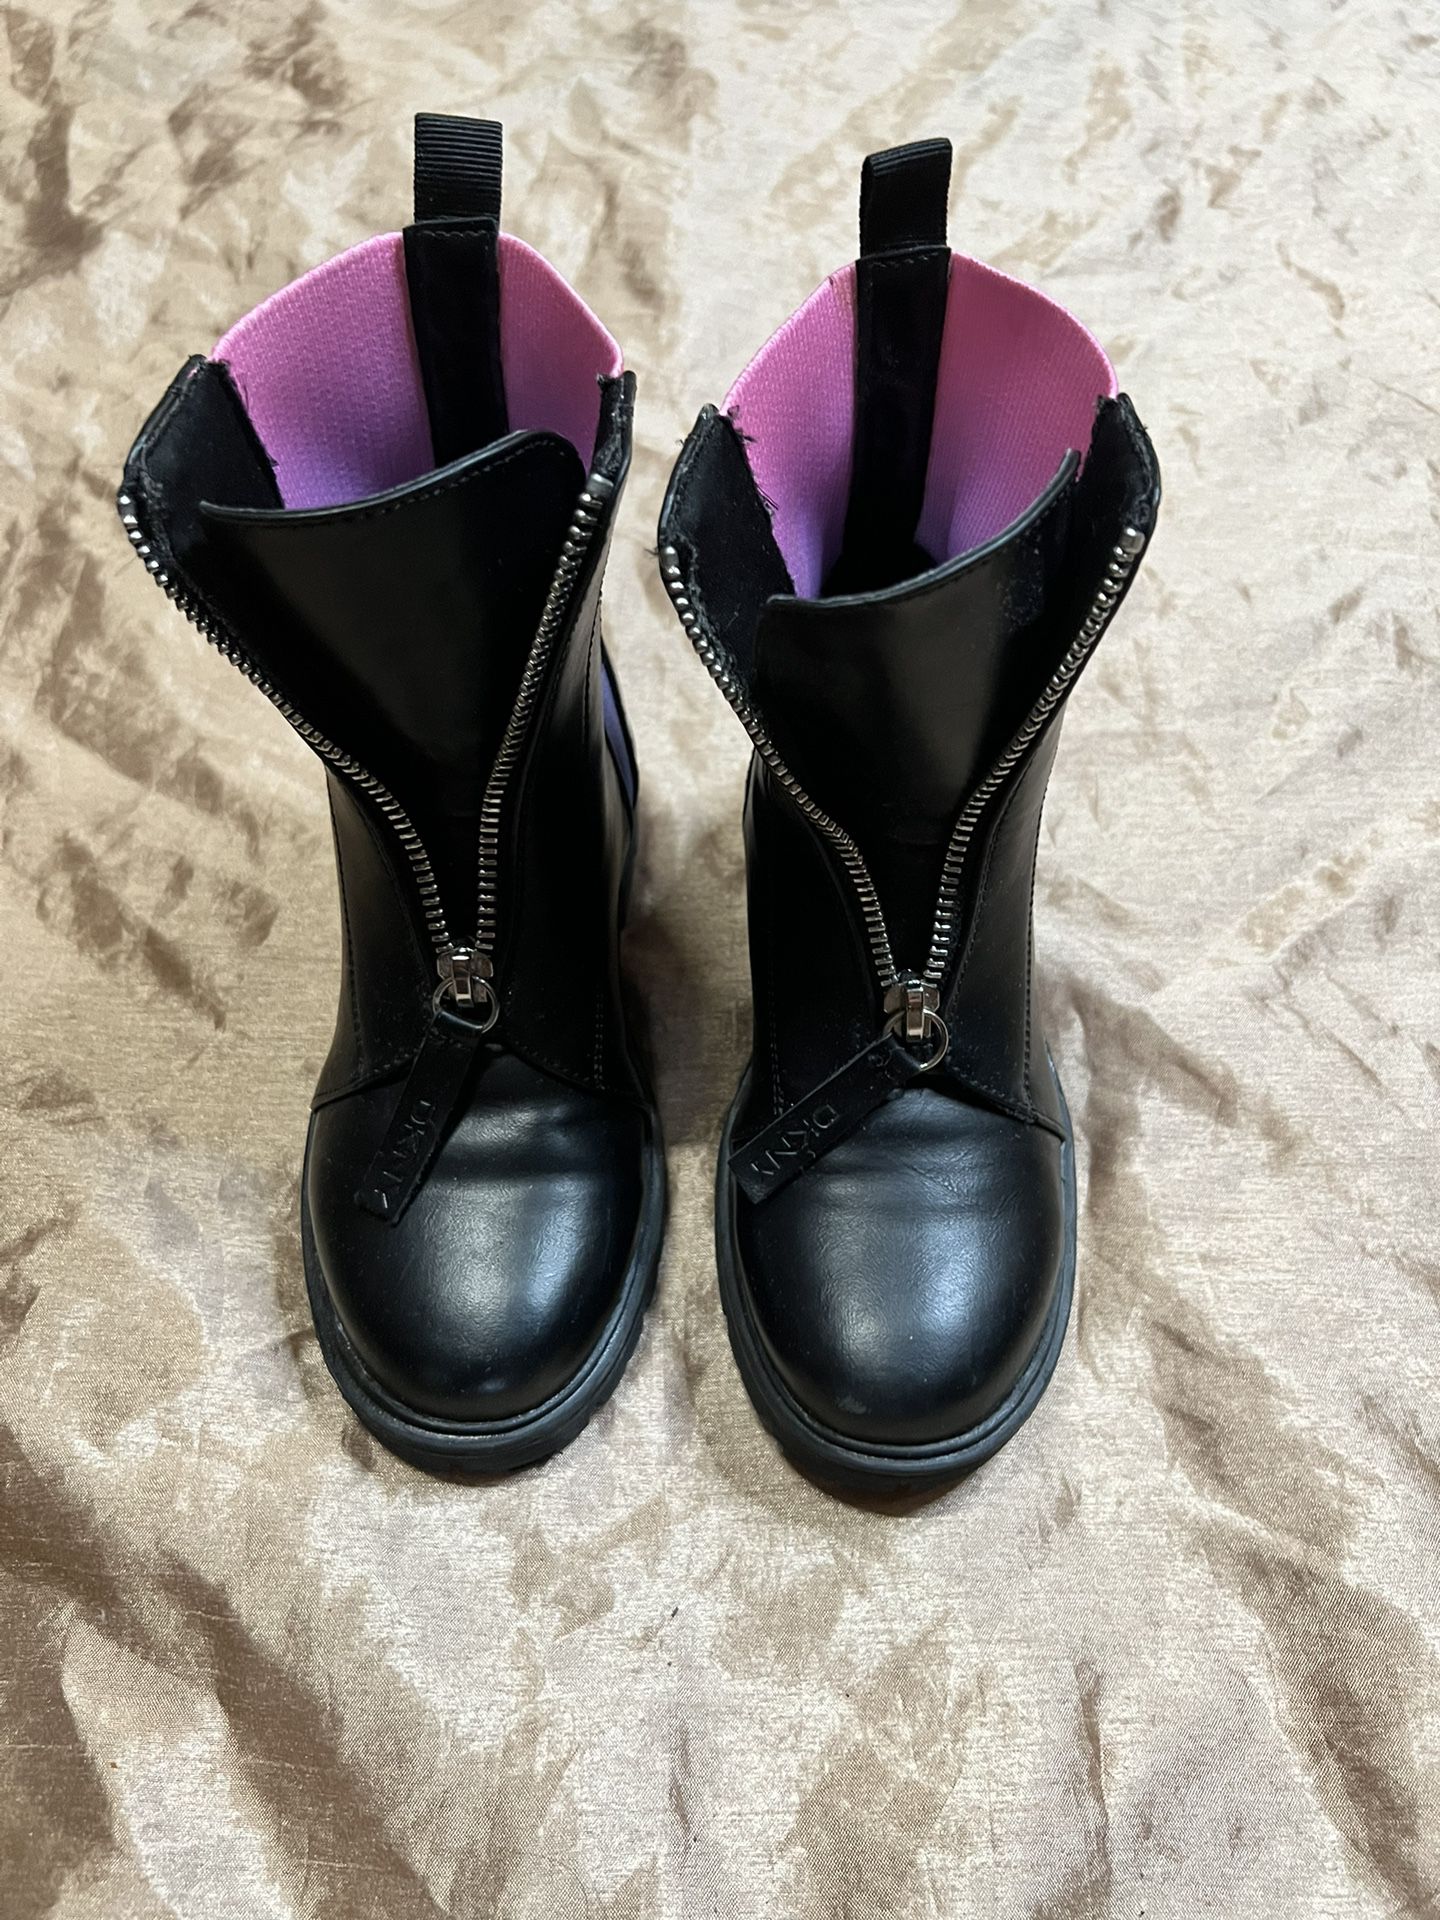 DKNY Toddler Girls Size 11 Moto Boots Black Pink Logo Combat Zipper retro and st